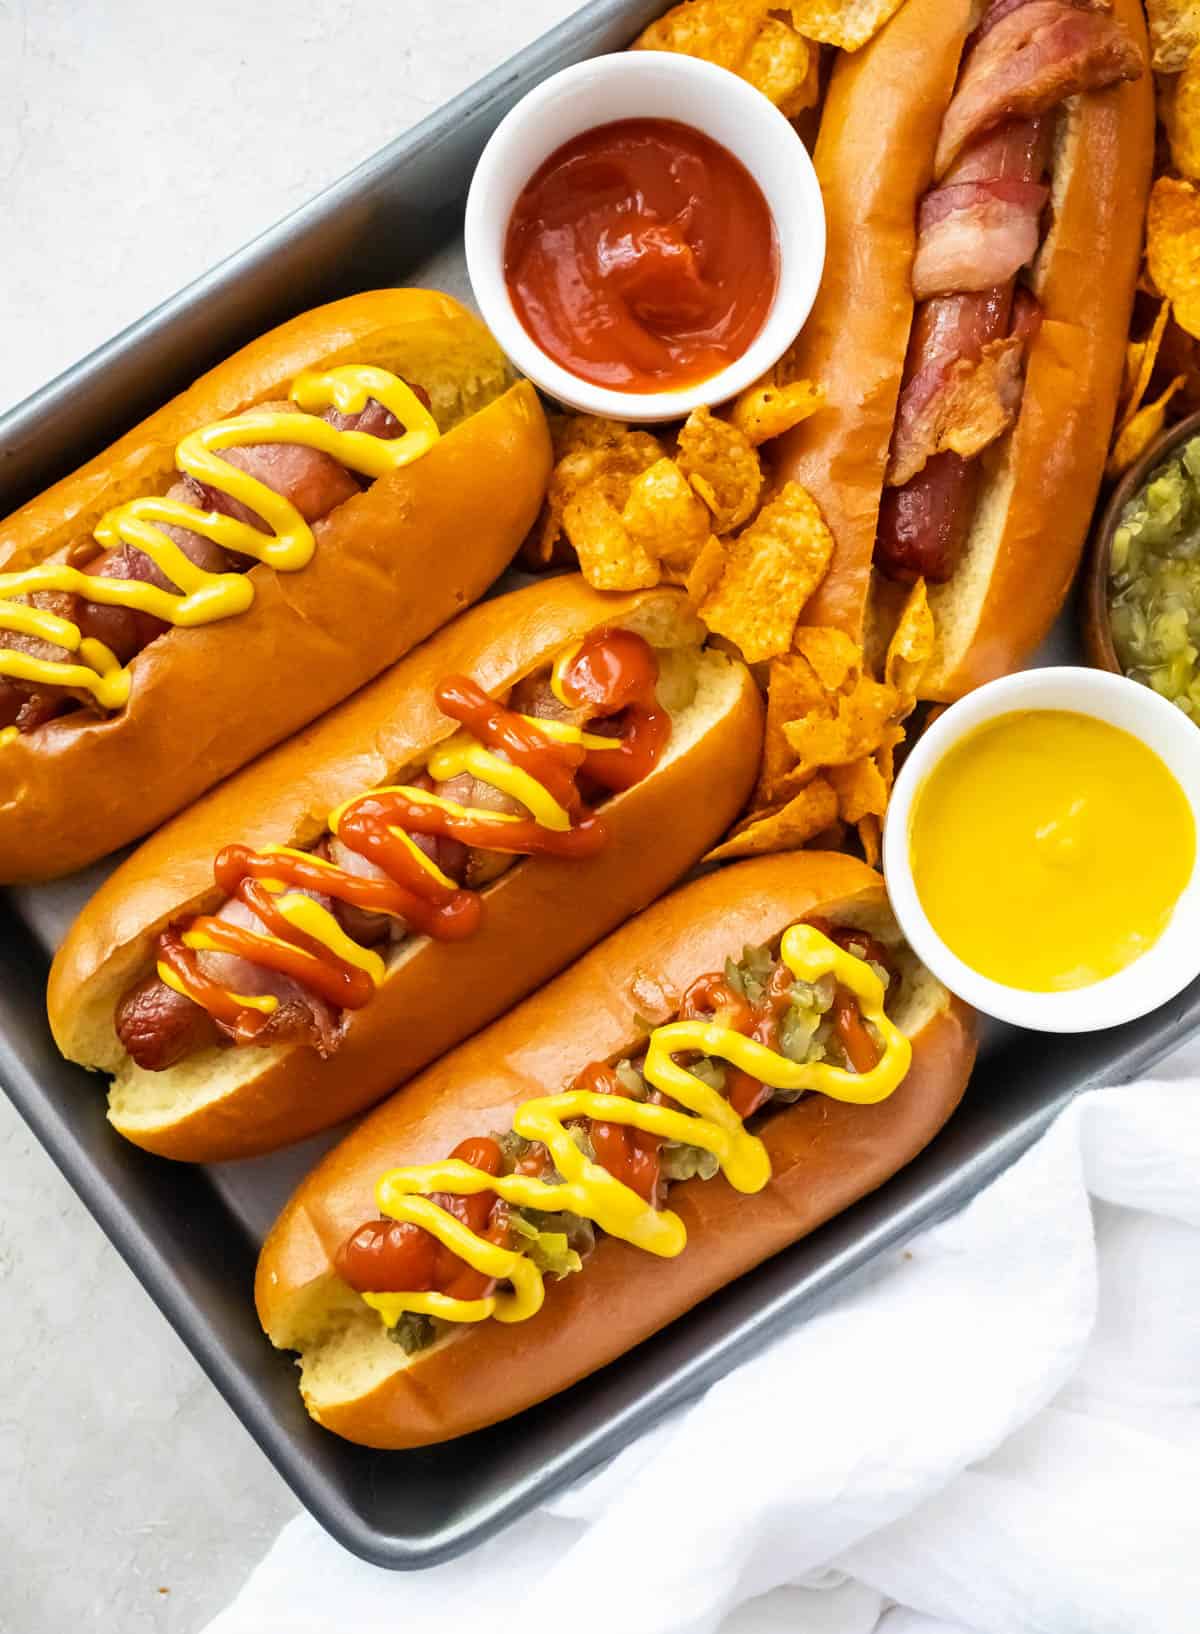 An overhead image of bacon wrapped hot dogs with ketchup and yellow mustard.